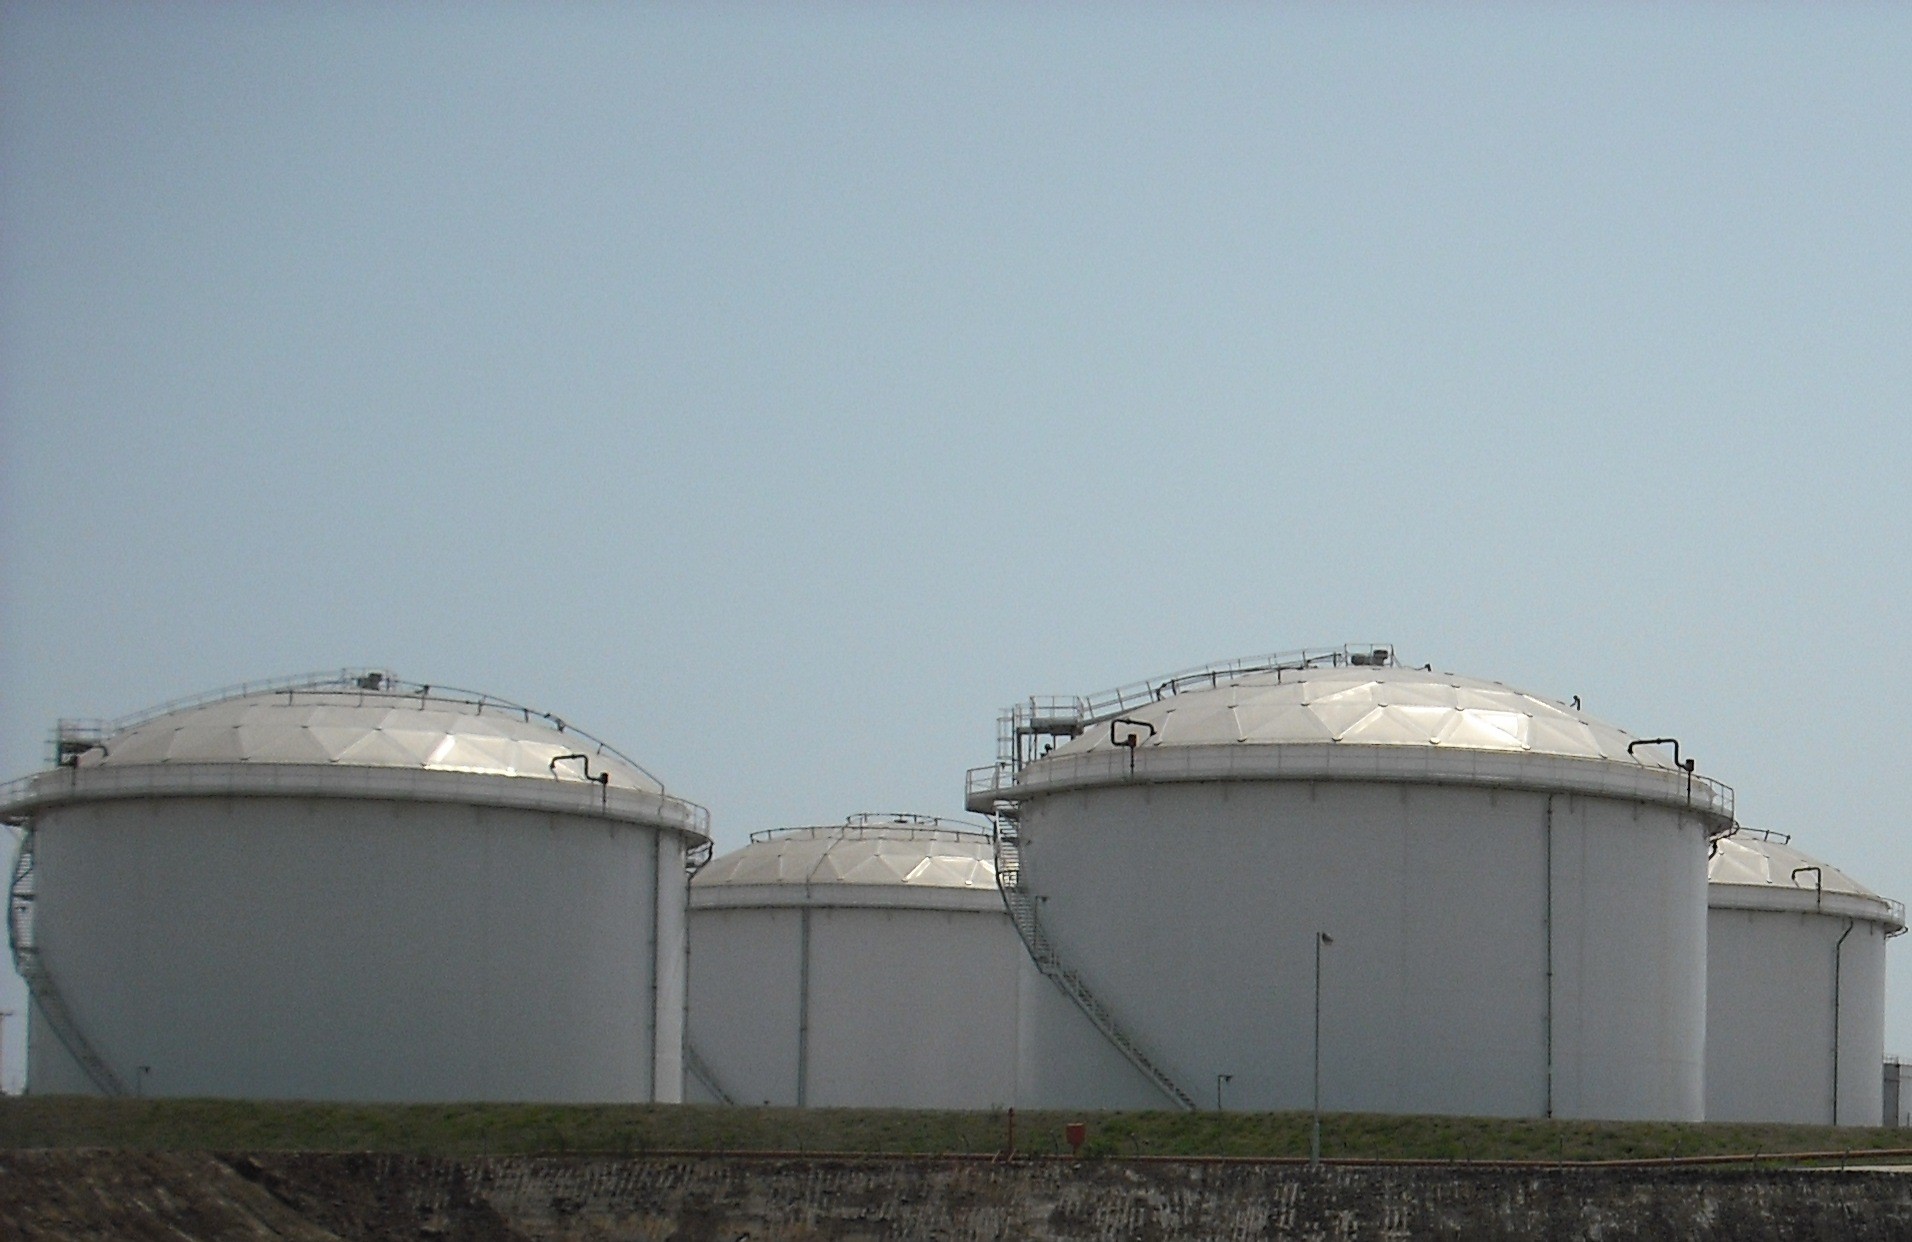 Tank farms will enable investors to store oil and gas, avoiding the need for them to build facilities.